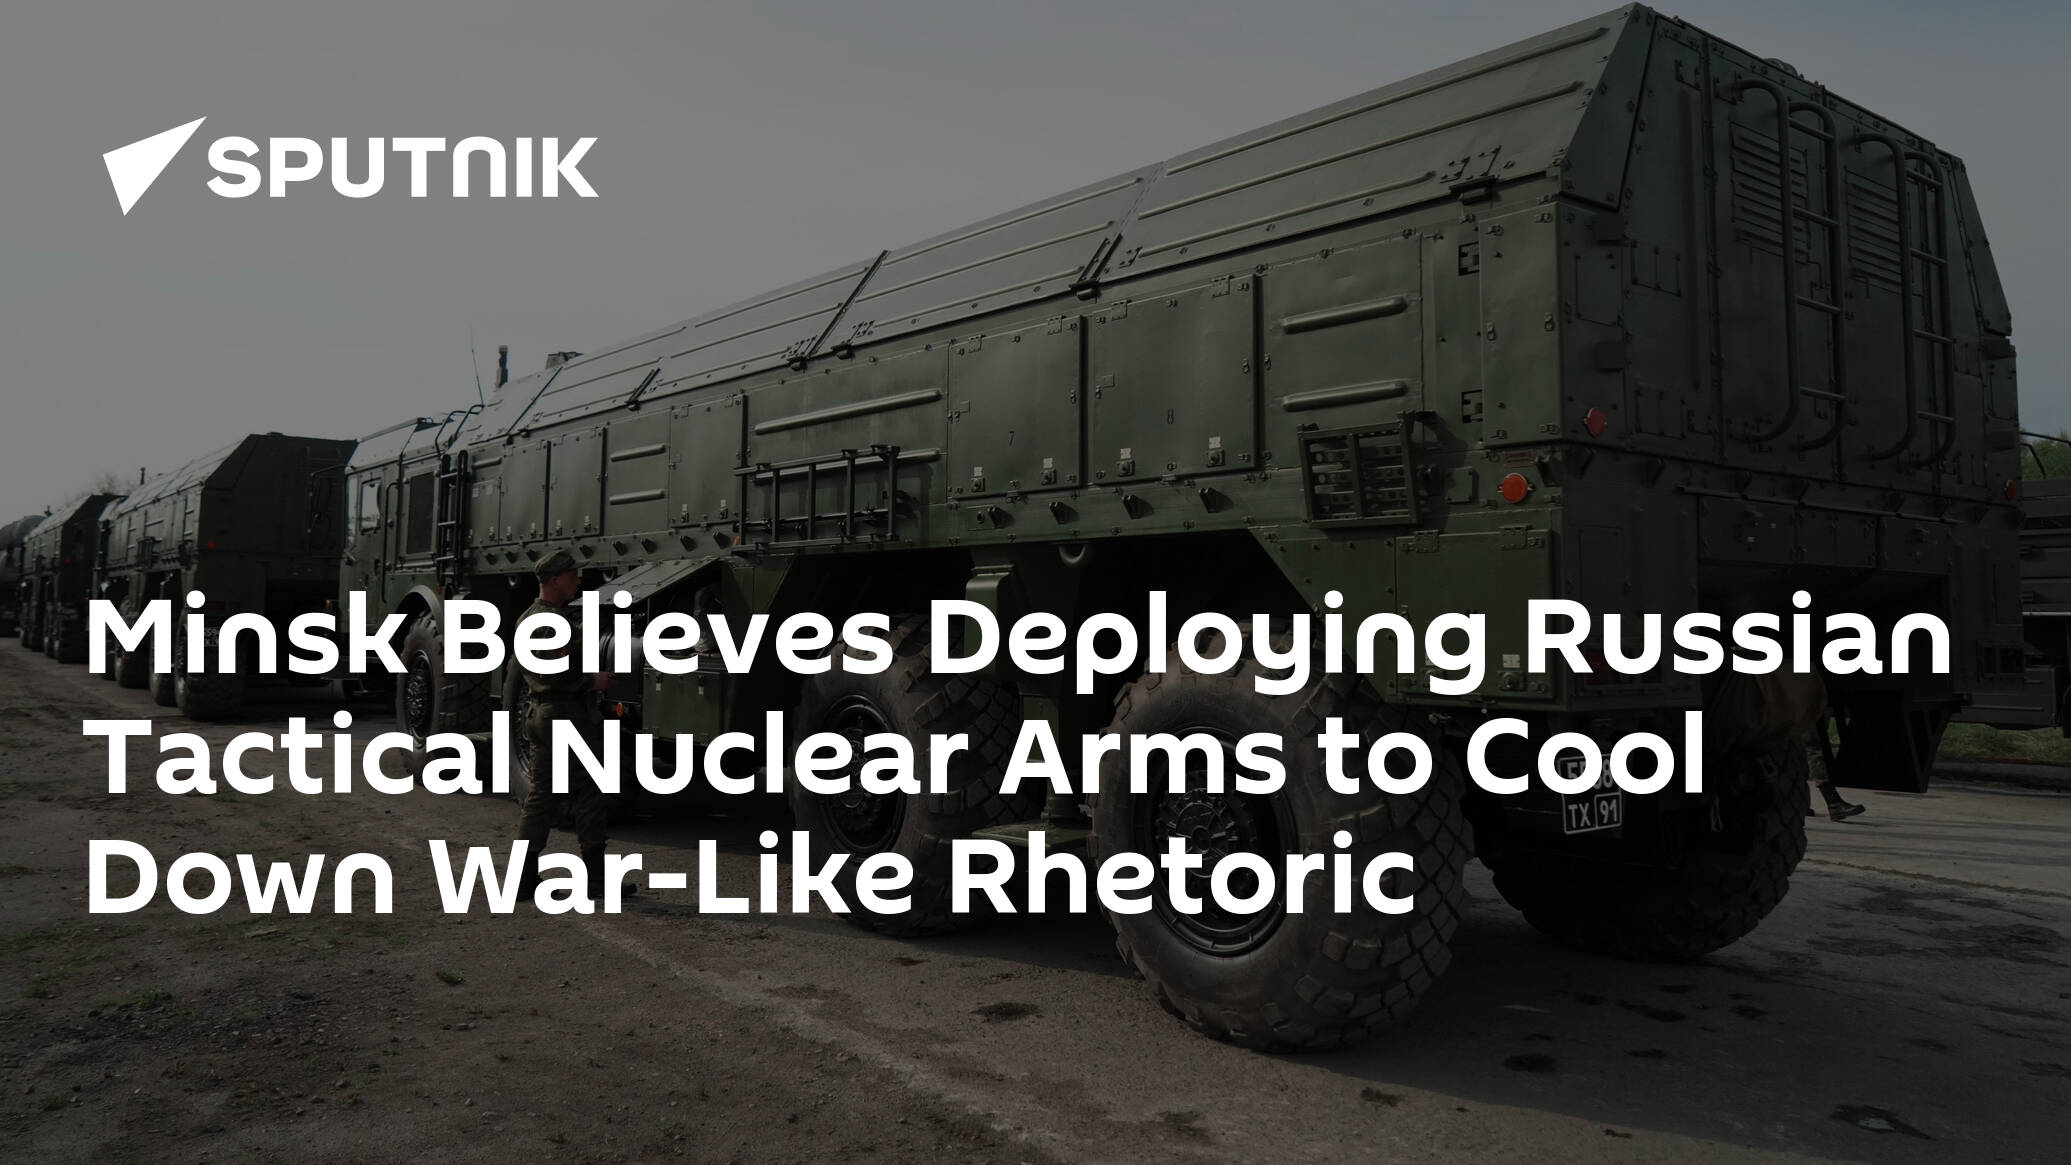 Minsk Believes Deploying Russian Tactical Nuclear Arms to Cool Down War-Like Rhetoric